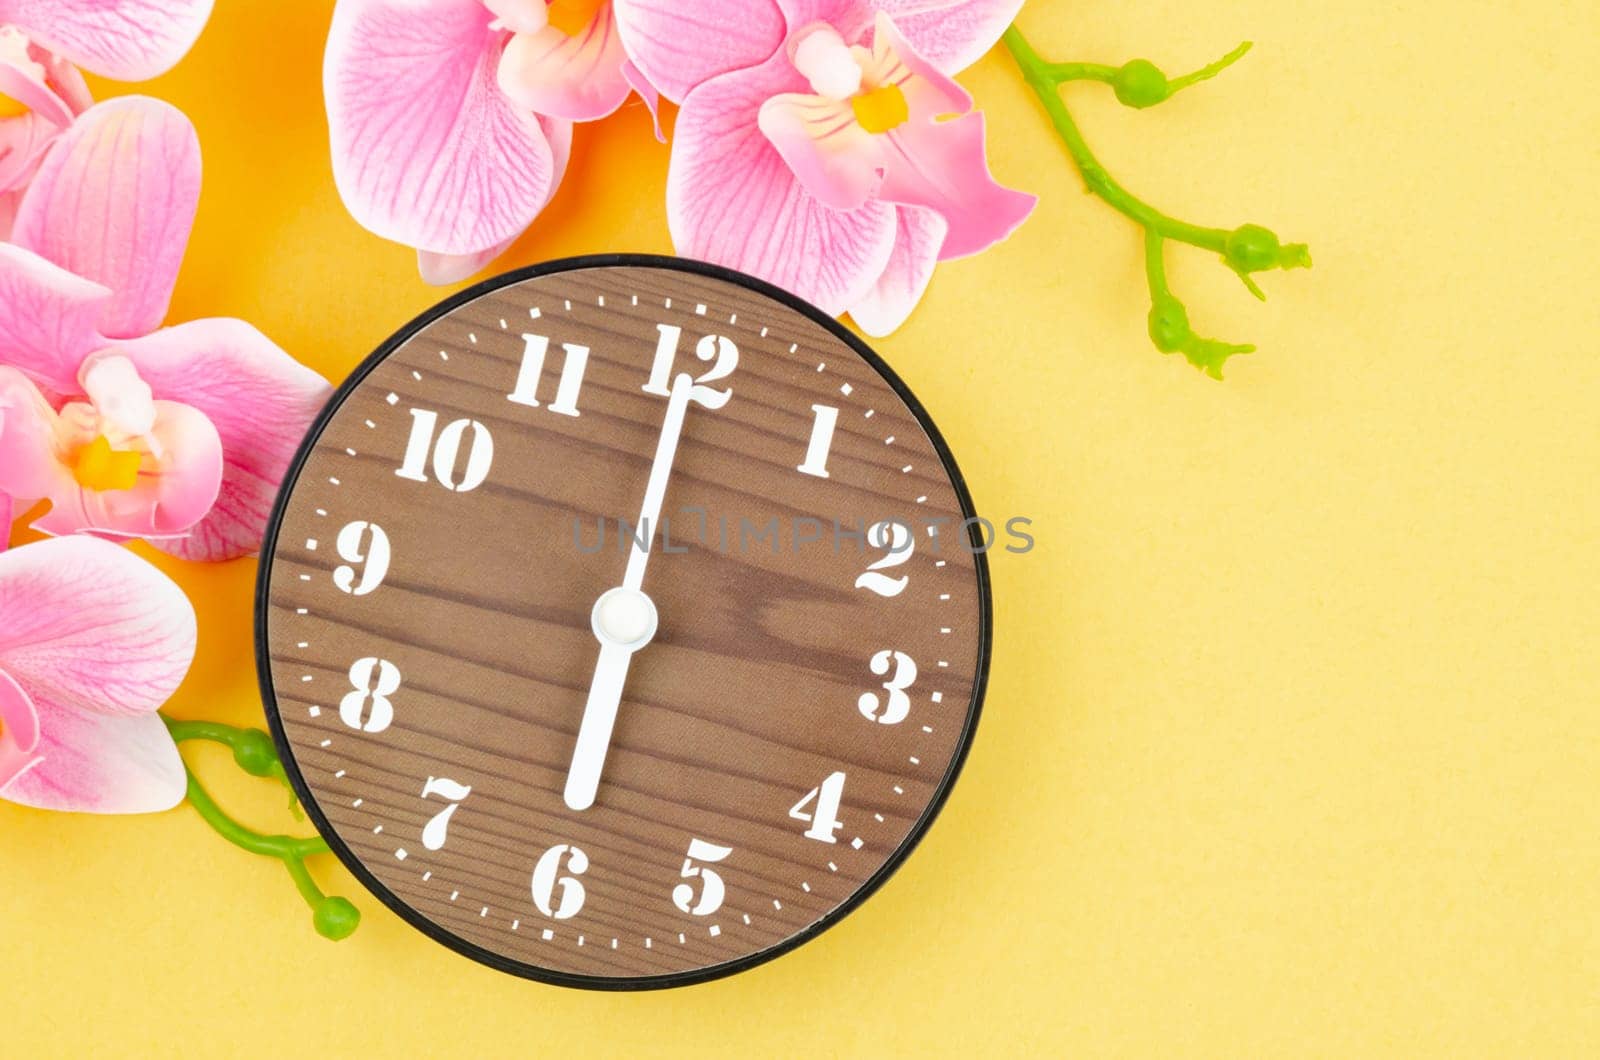 The Wooden clock and pink streaked orchid flower on yellow background. by Gamjai